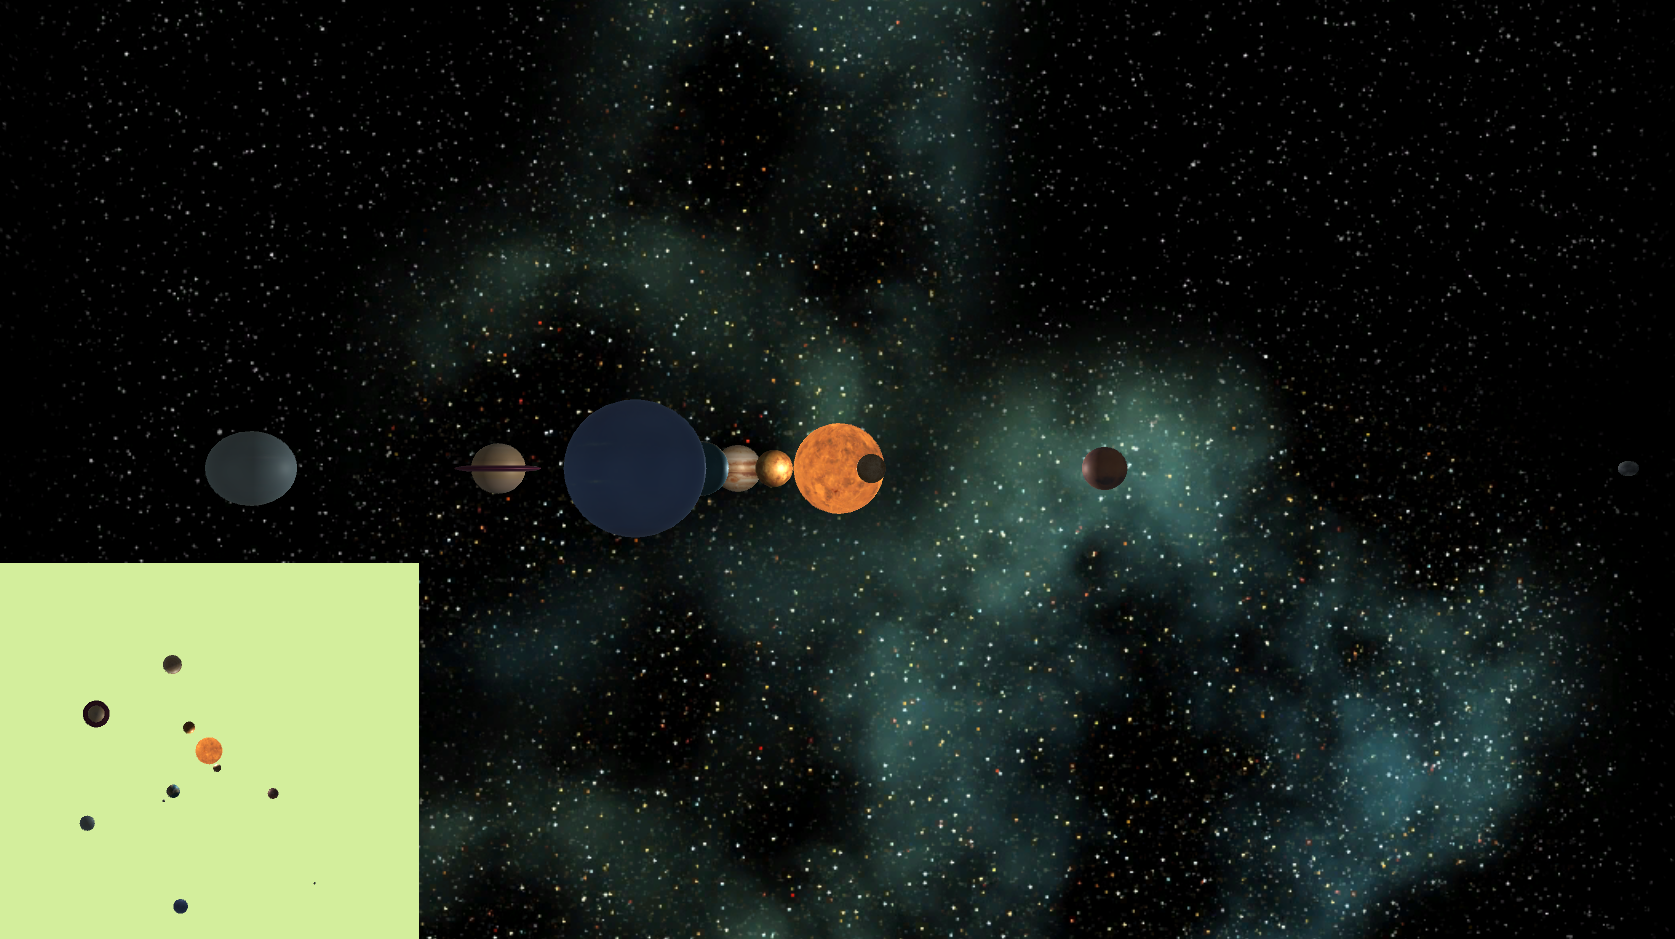 Solar System Model - Can you click all the planets?